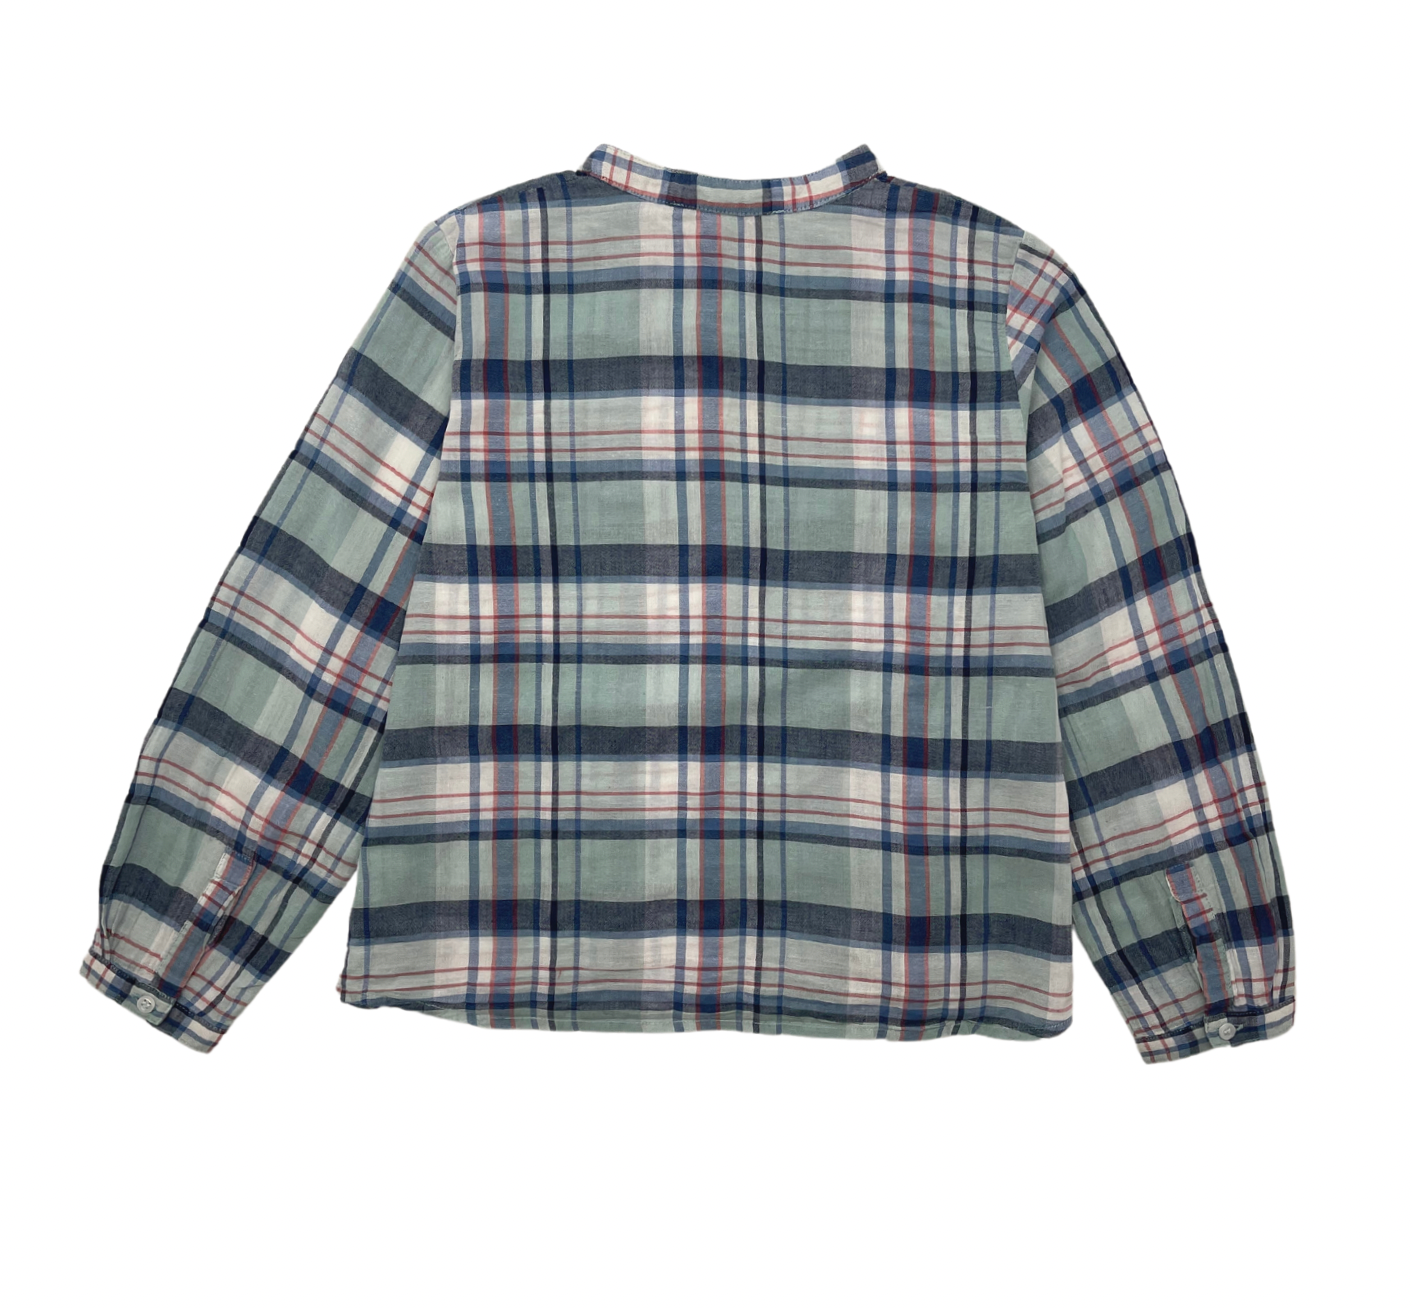 BONPOINT - Checked shirt - 6 years old